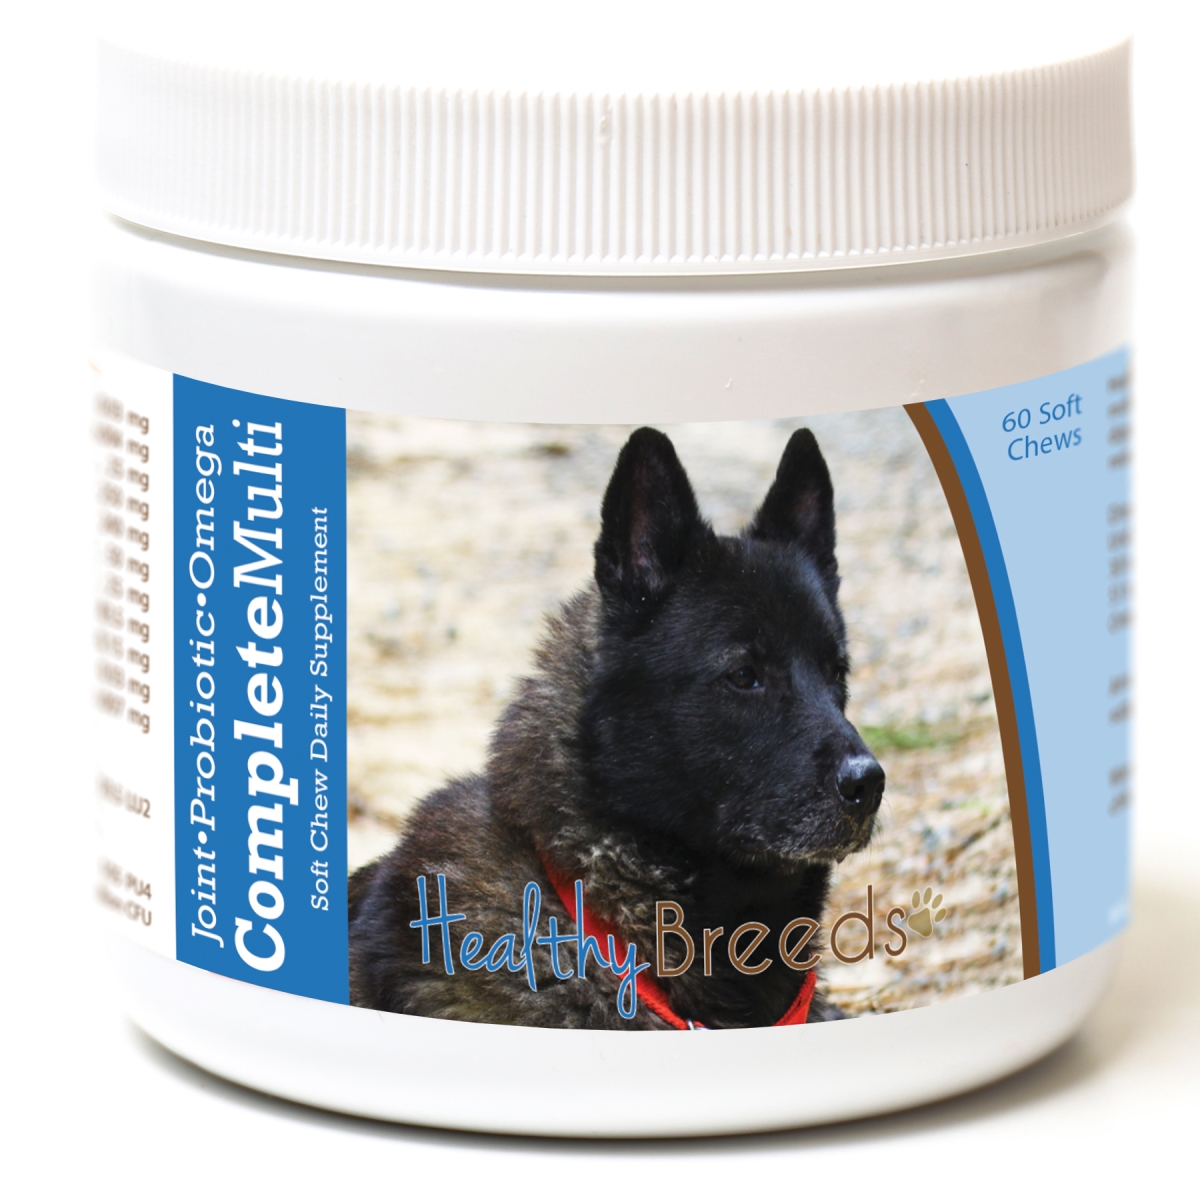 Picture of Healthy Breeds 192959008579 Newfoundland All in One Multivitamin Soft Chew - 60 Count